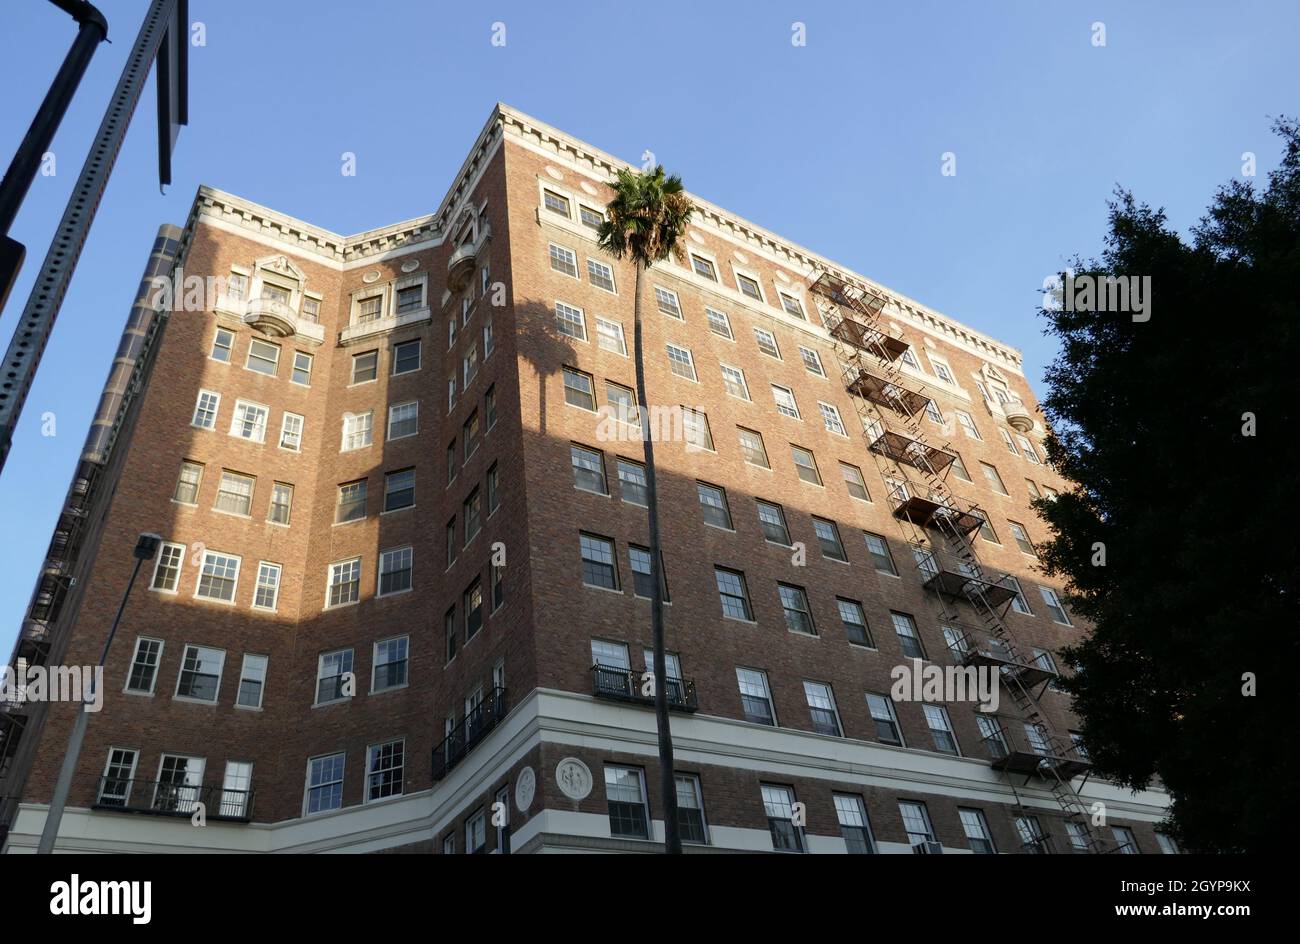 Los Angeles, California, USA 29th September 2021 A general view of atmosphere of The Talmadge Apts, Historic building, Singer Al Jolson and Actor Jason Lee Former home/residence and Filming Location of Charlie Chaplin and Buster Keaton Movies at 3278 Wilshire Blvd on September 29, 2021 in Los Angeles, California, USA. Photo by Barry King/Alamy Stock Photo Stock Photo